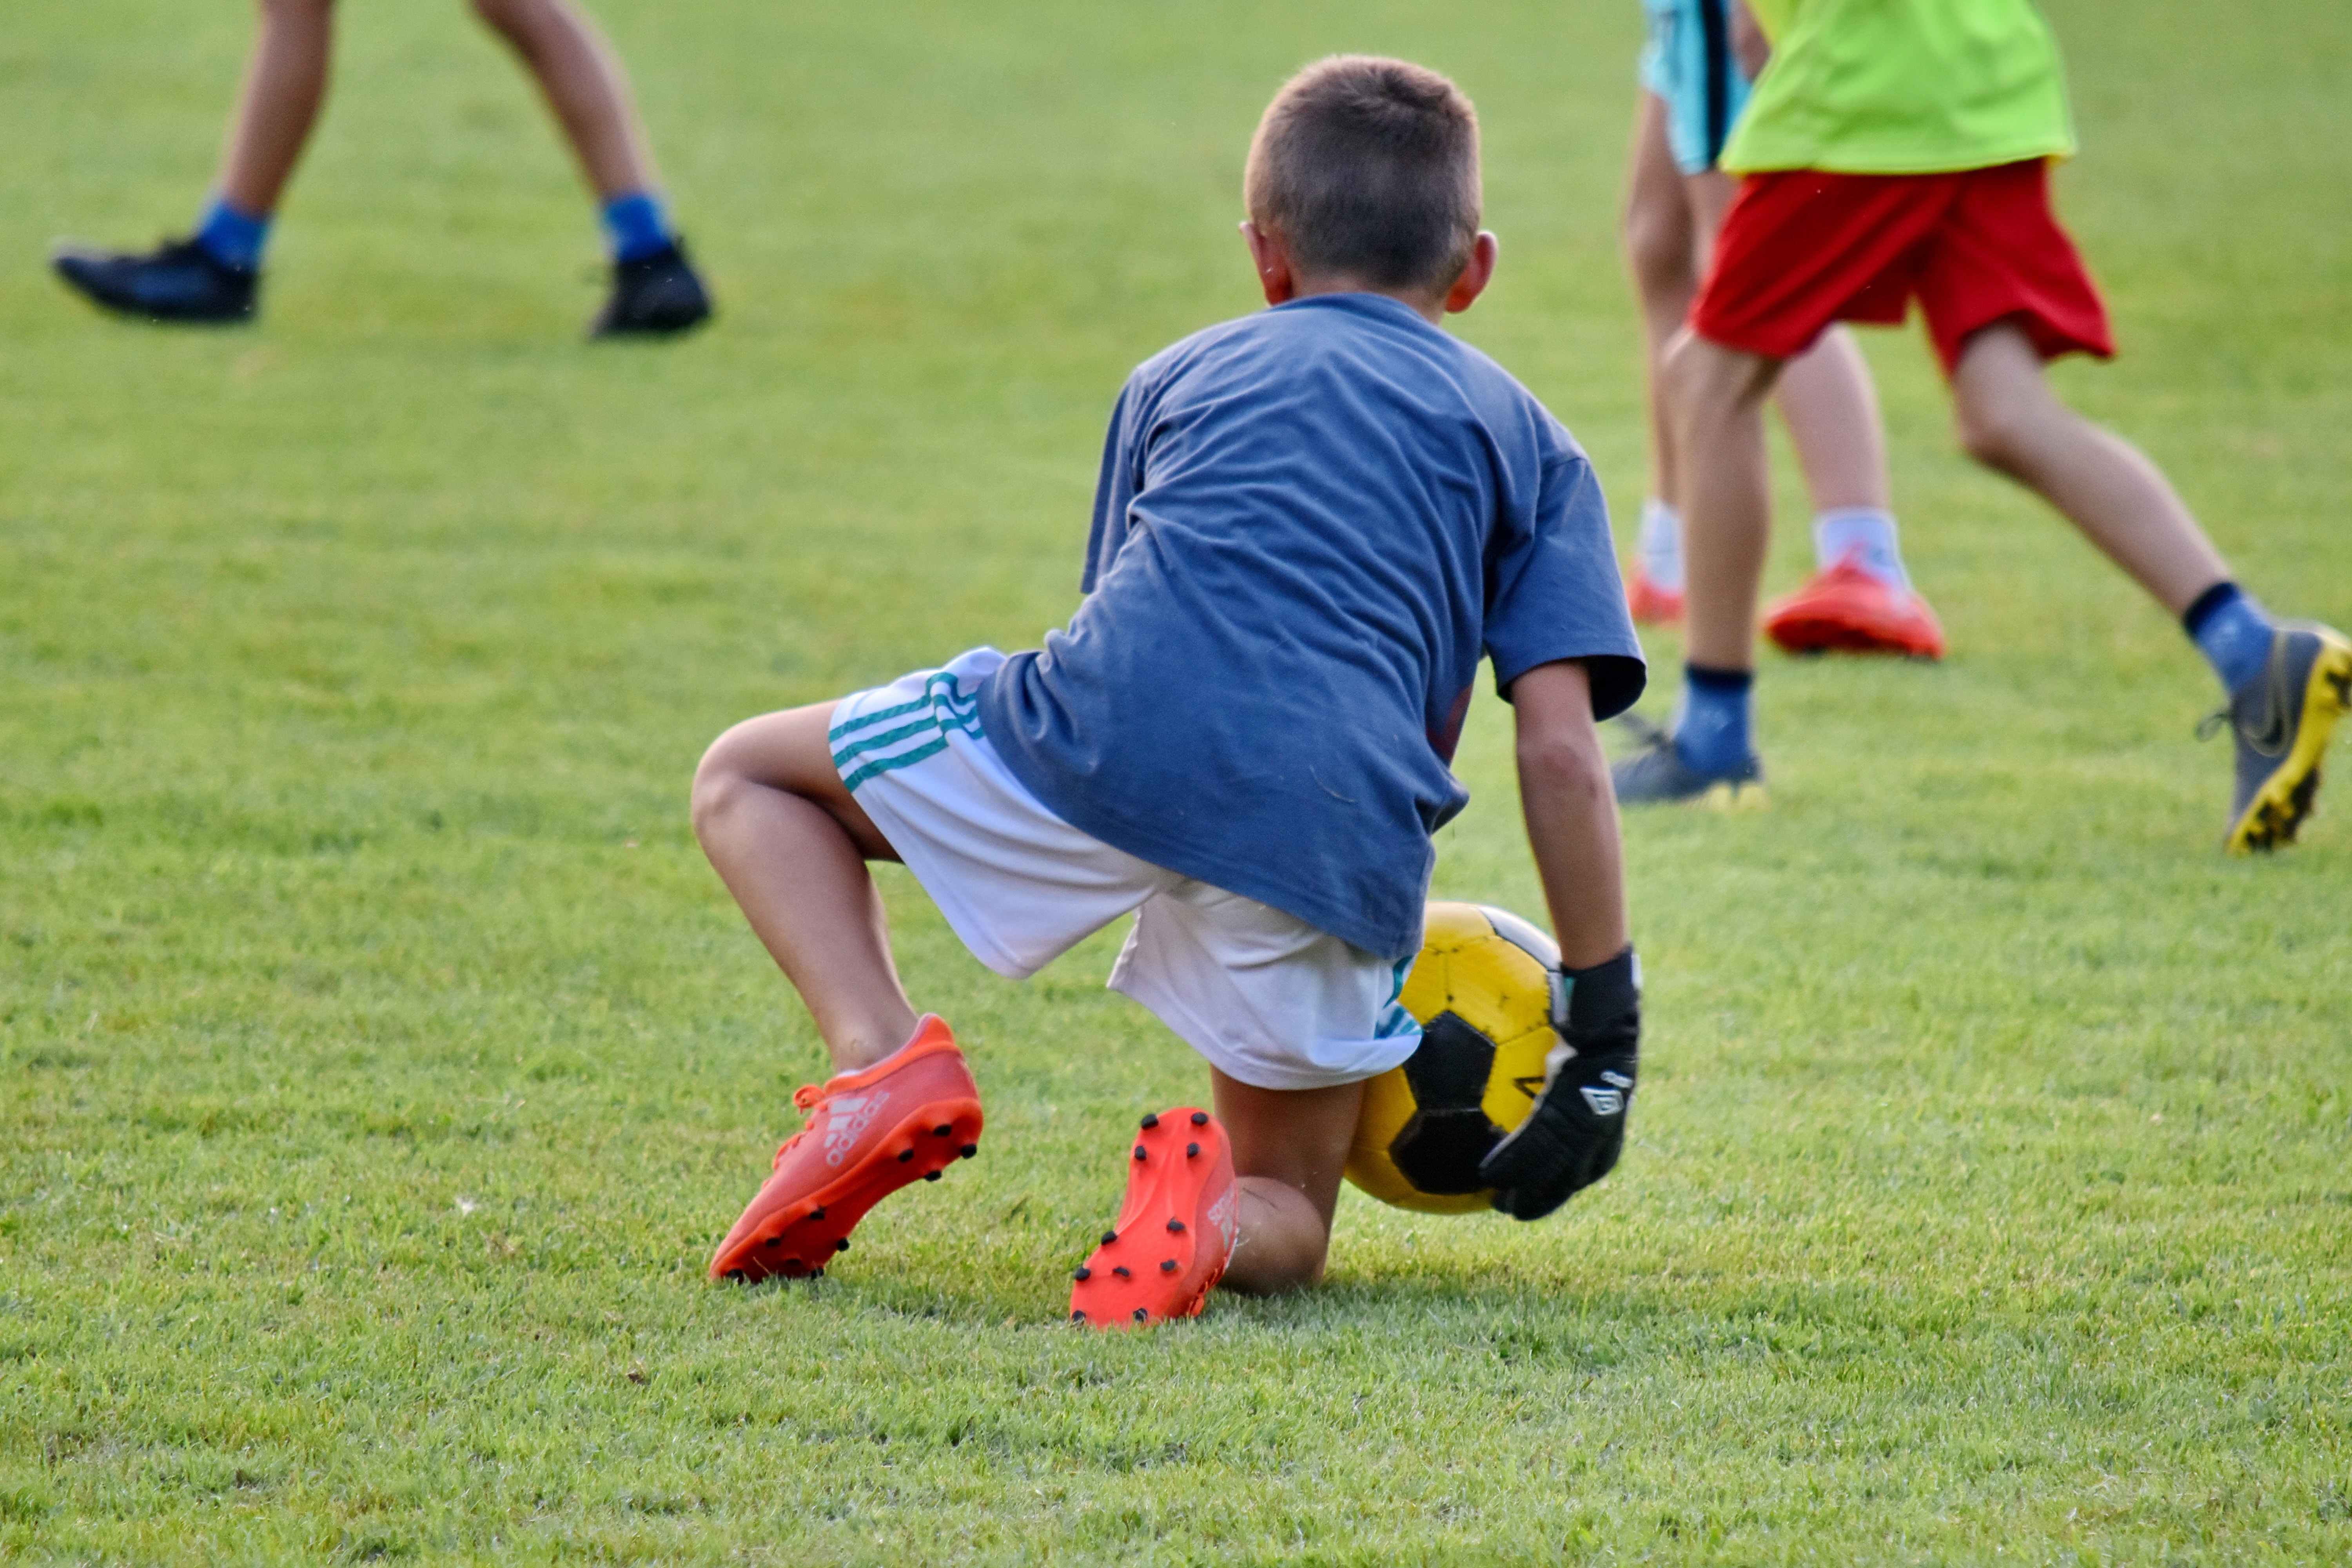 Free picture: championship, child, football player, game, player, soccer ball, football, soccer, sport, grass